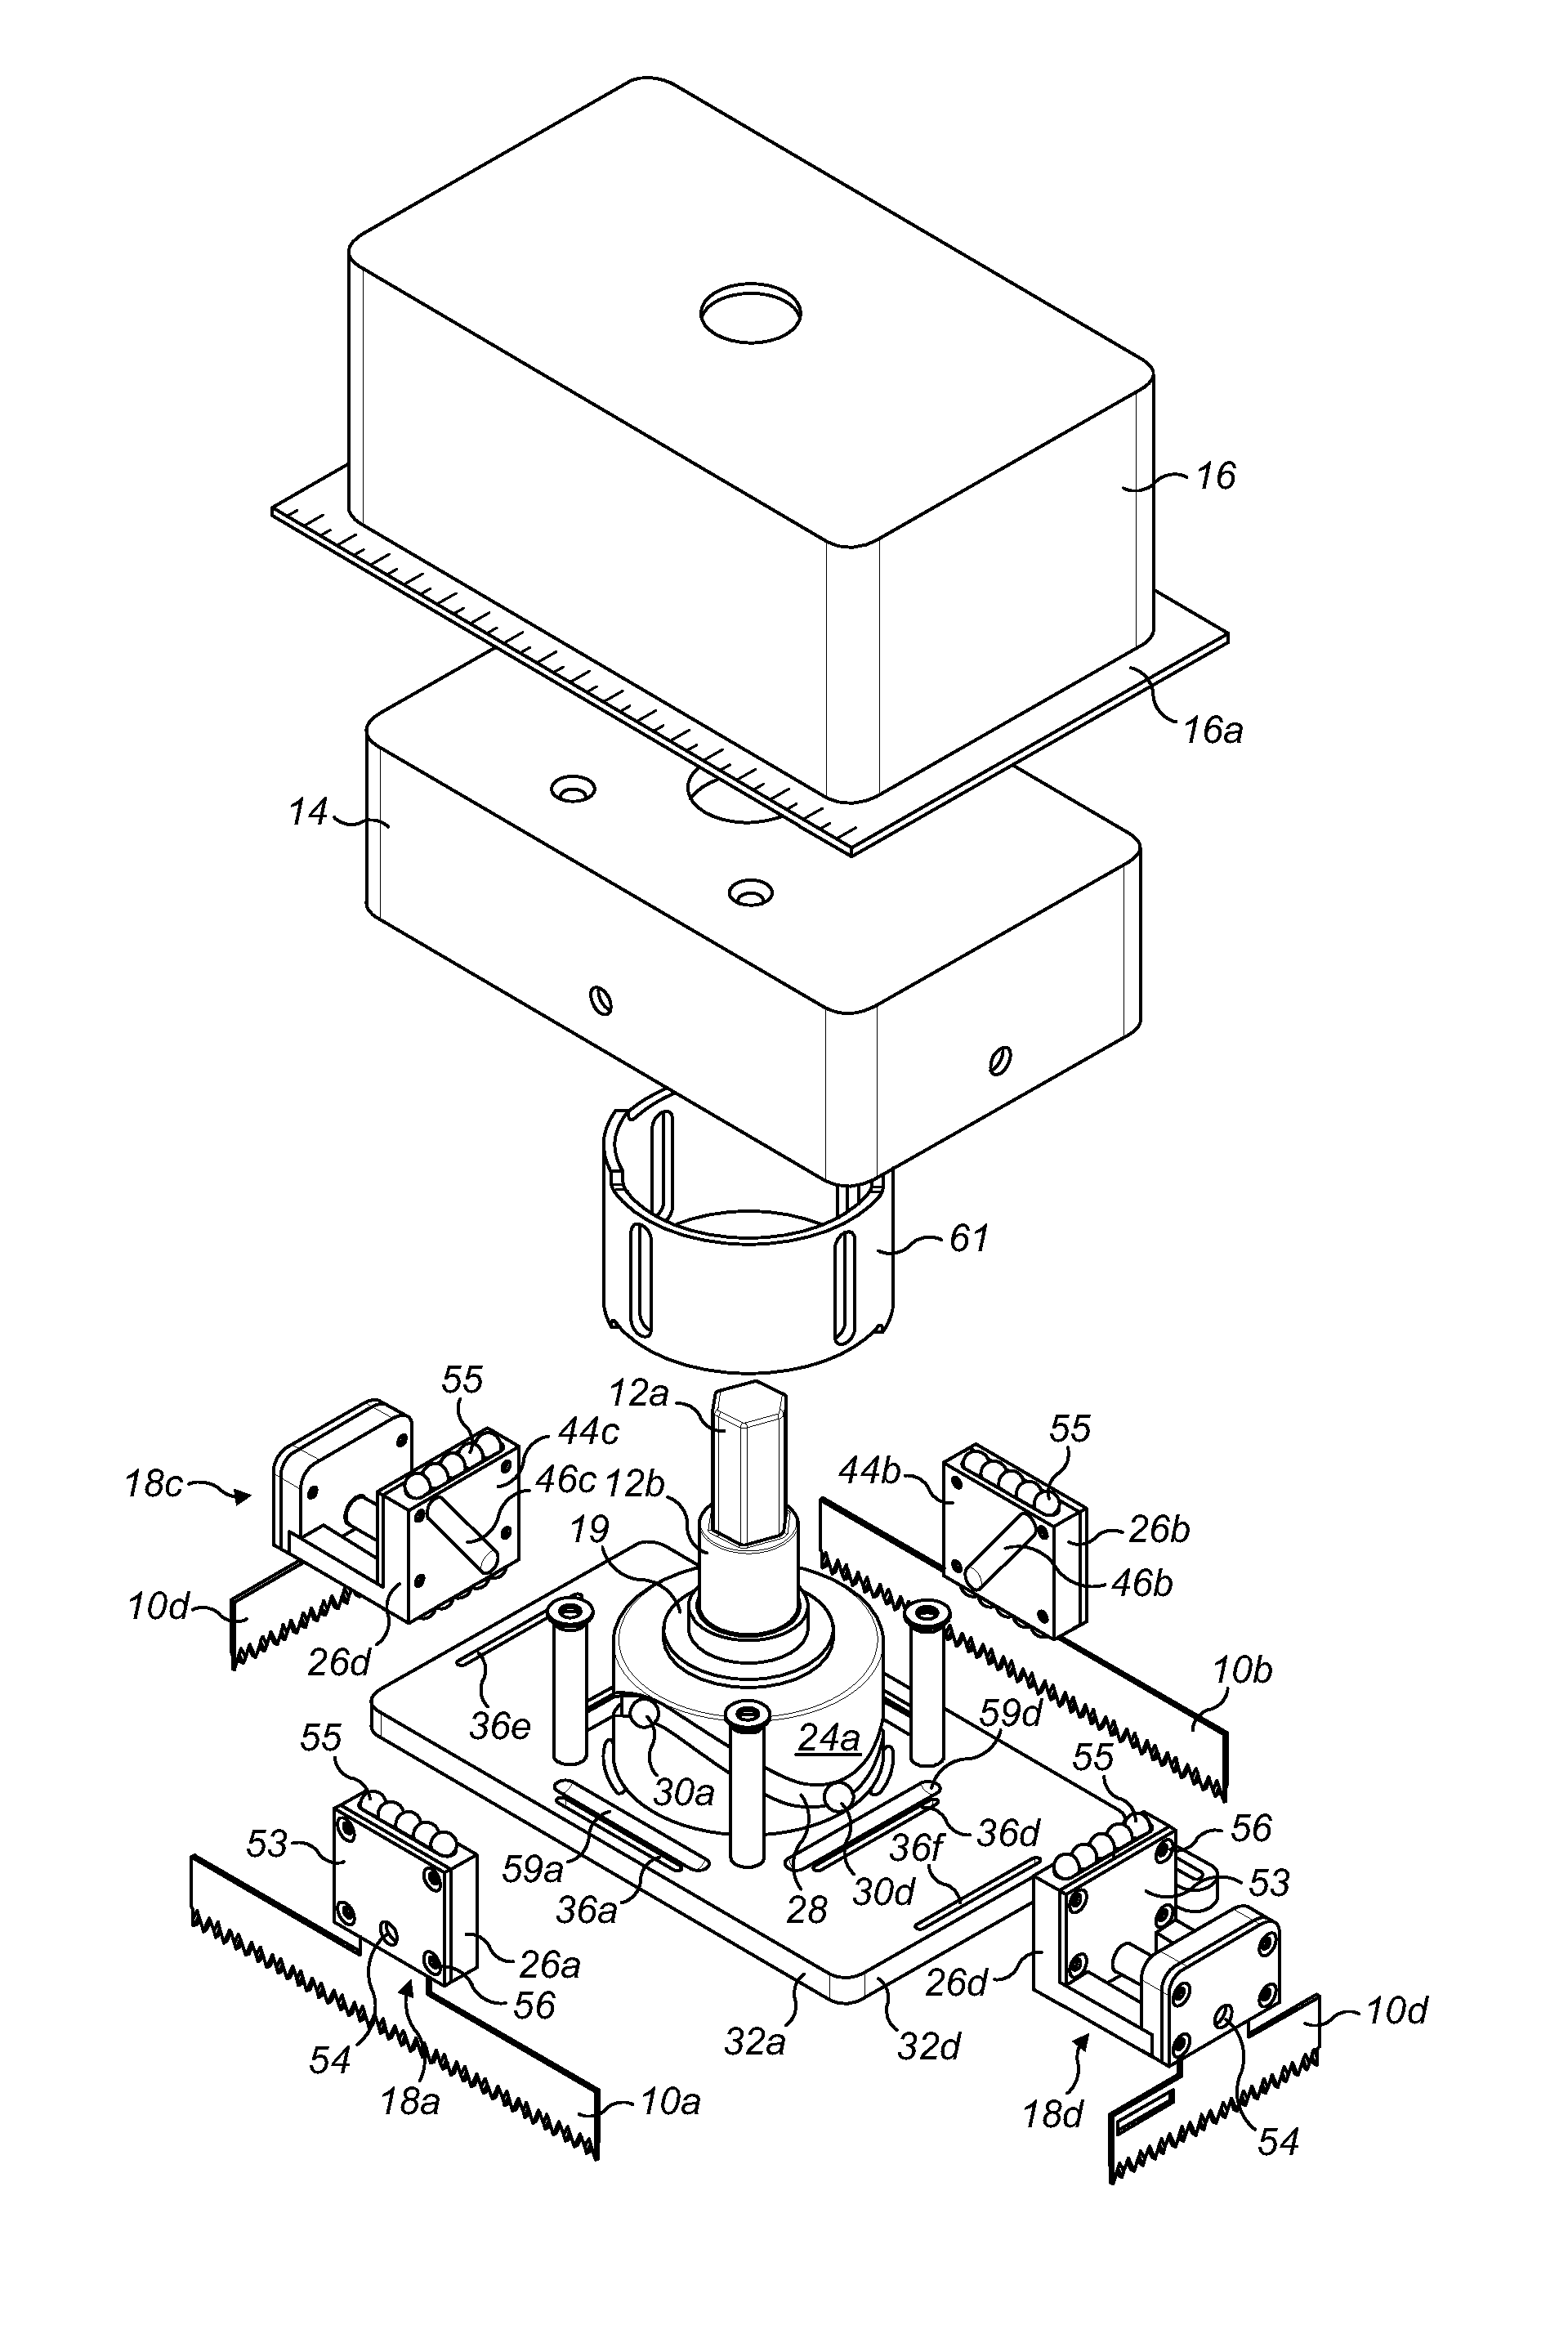 Converting between rotary and linear motion, and a sawing device